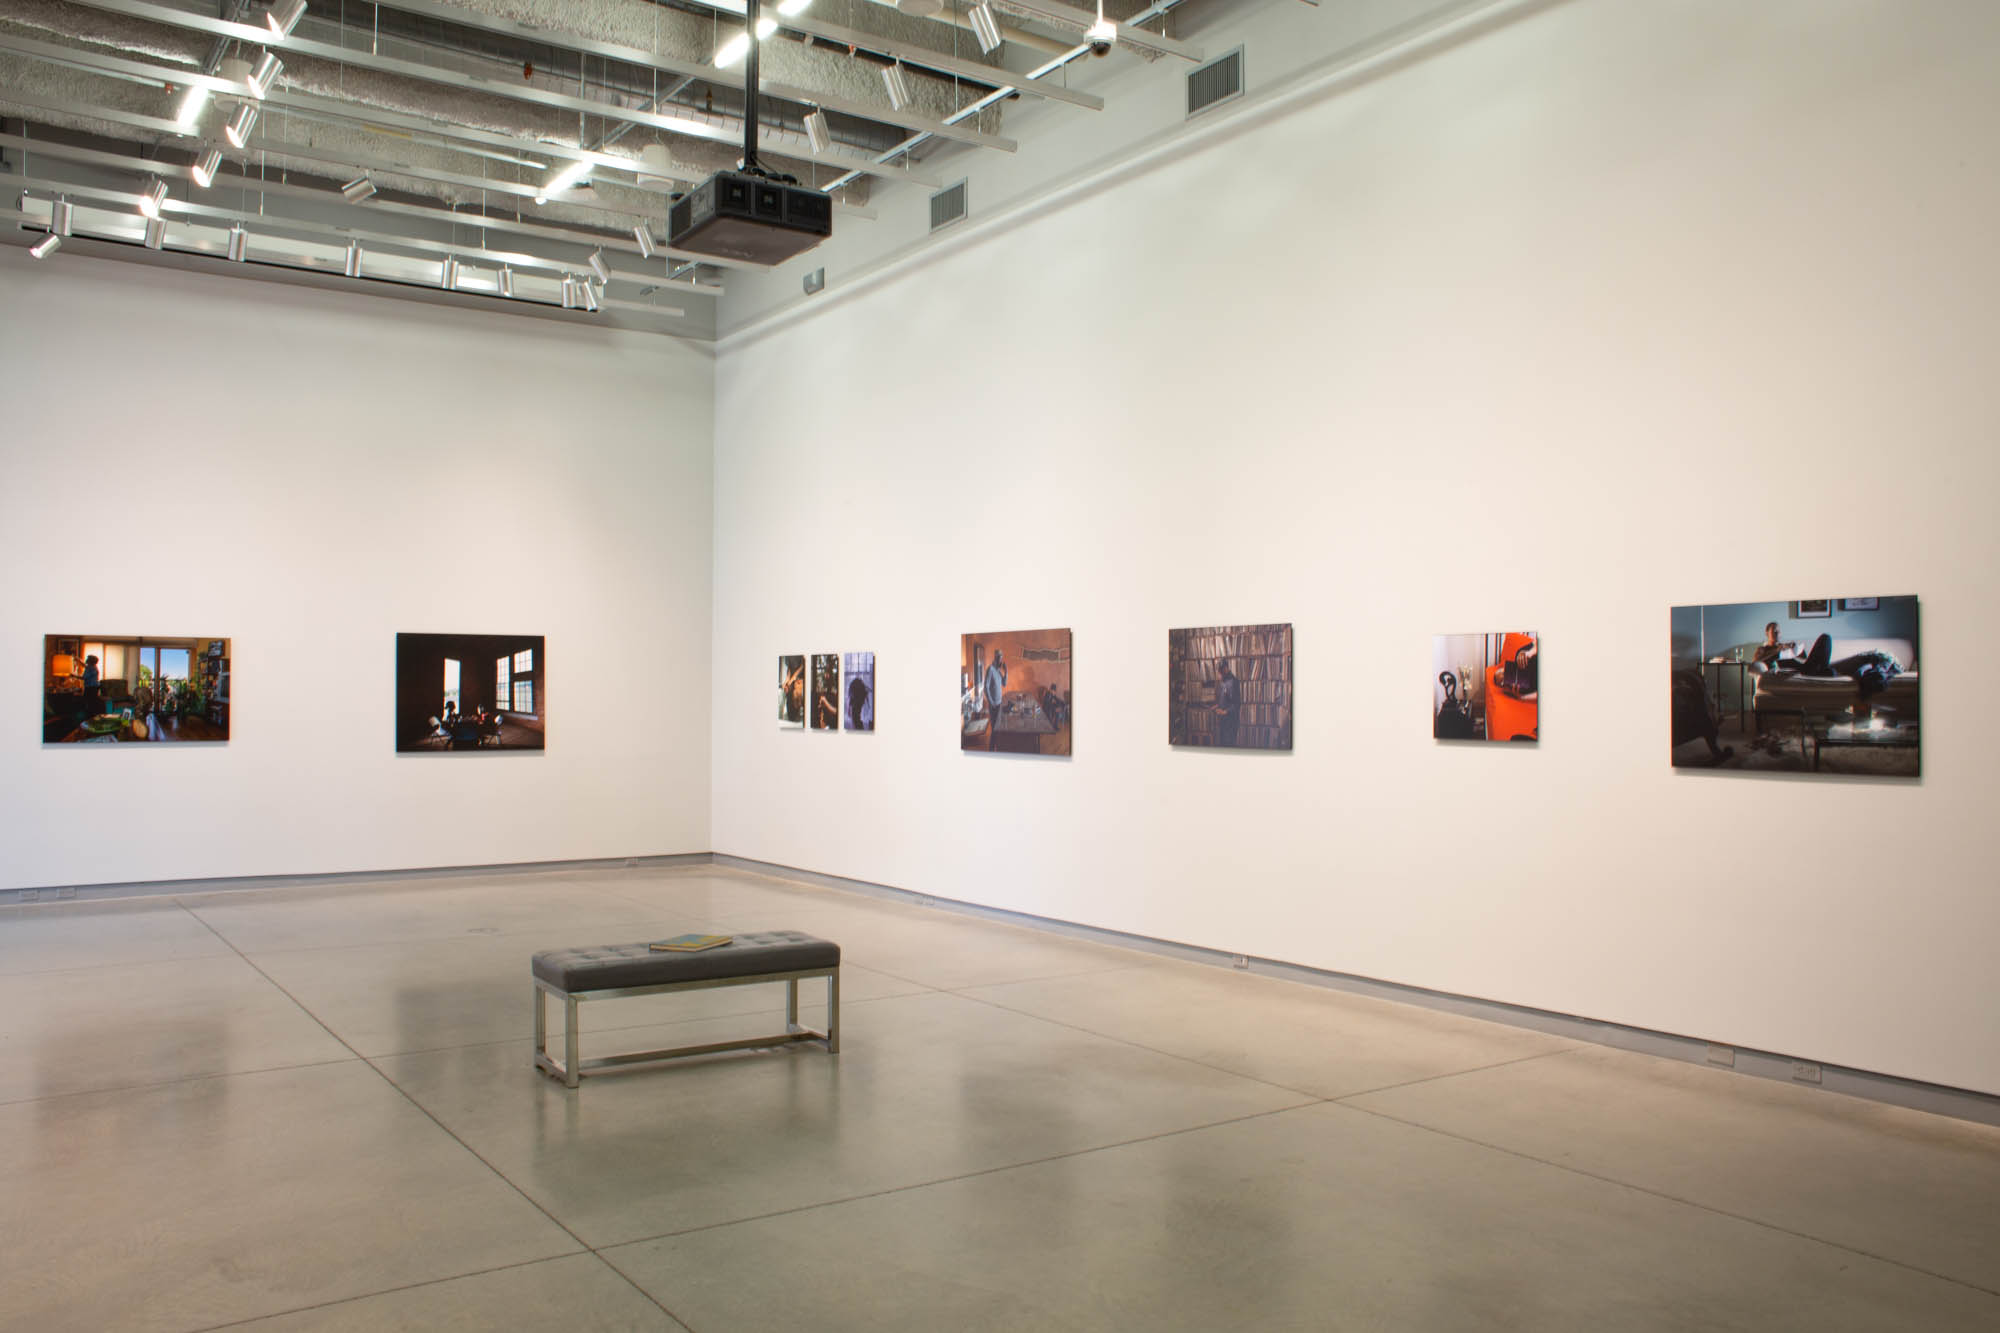 Installation view, courtesy of University Galleries